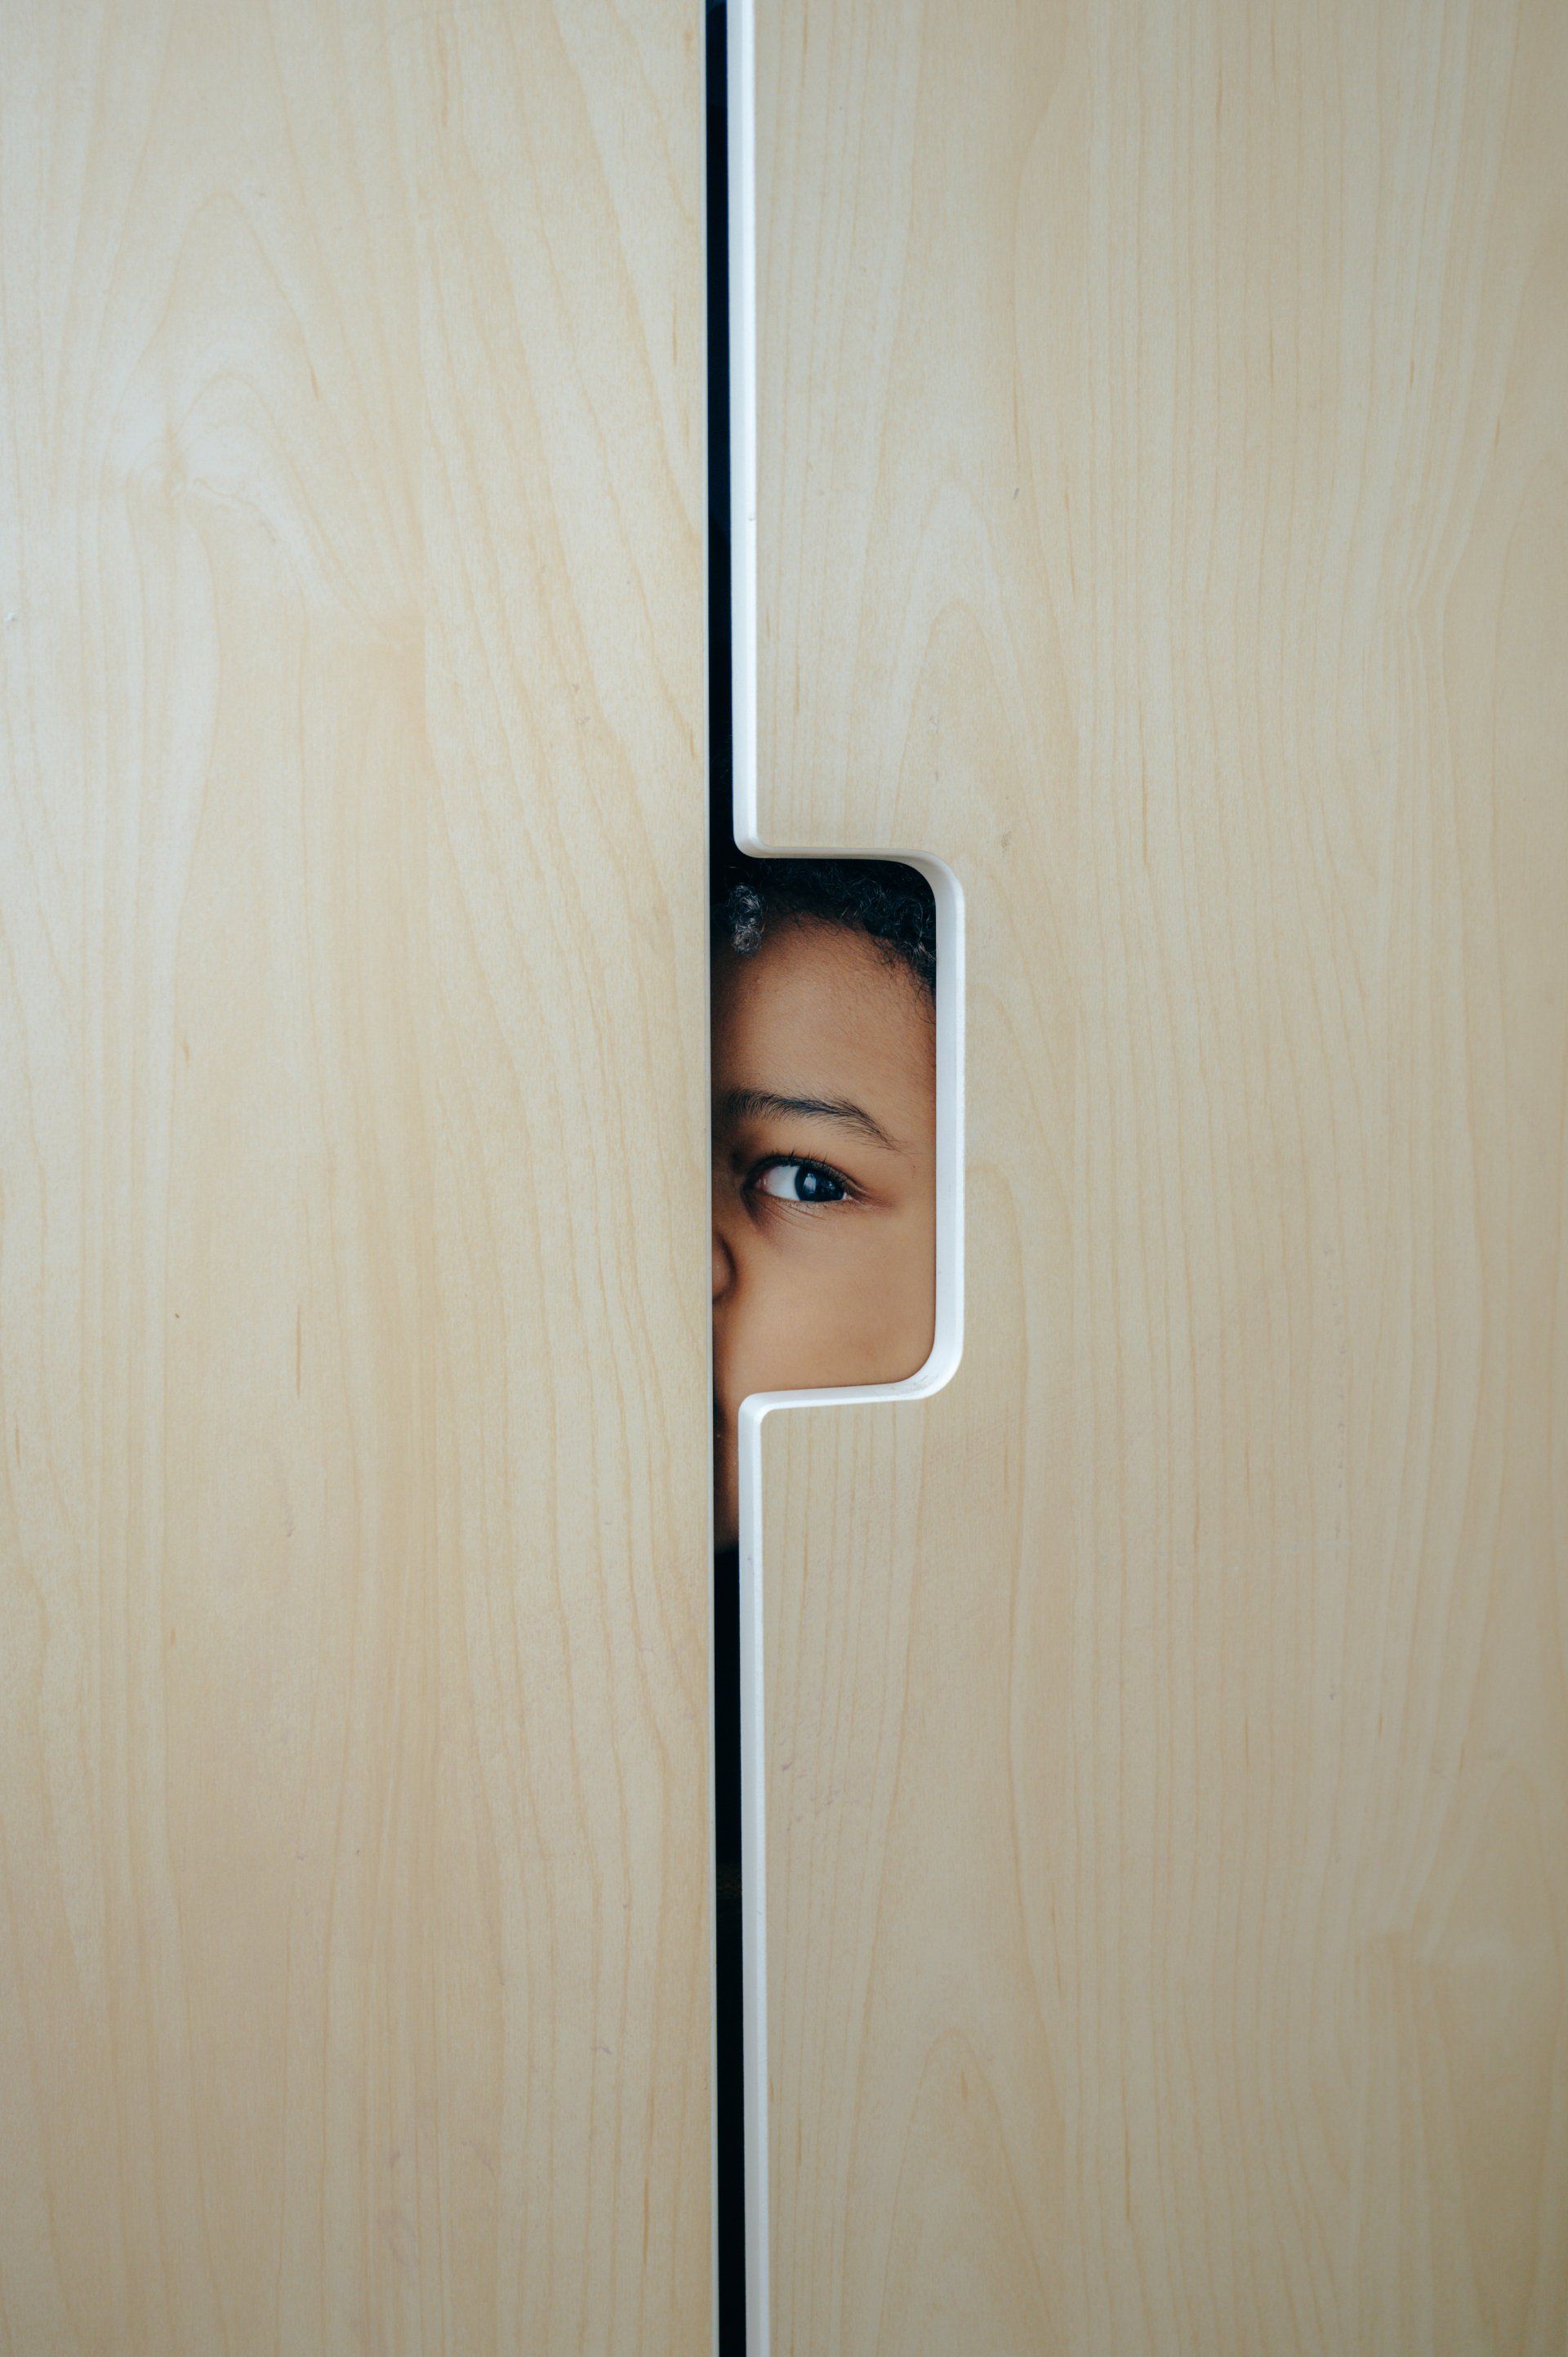 Profile of a person's face looking through a gap in a door